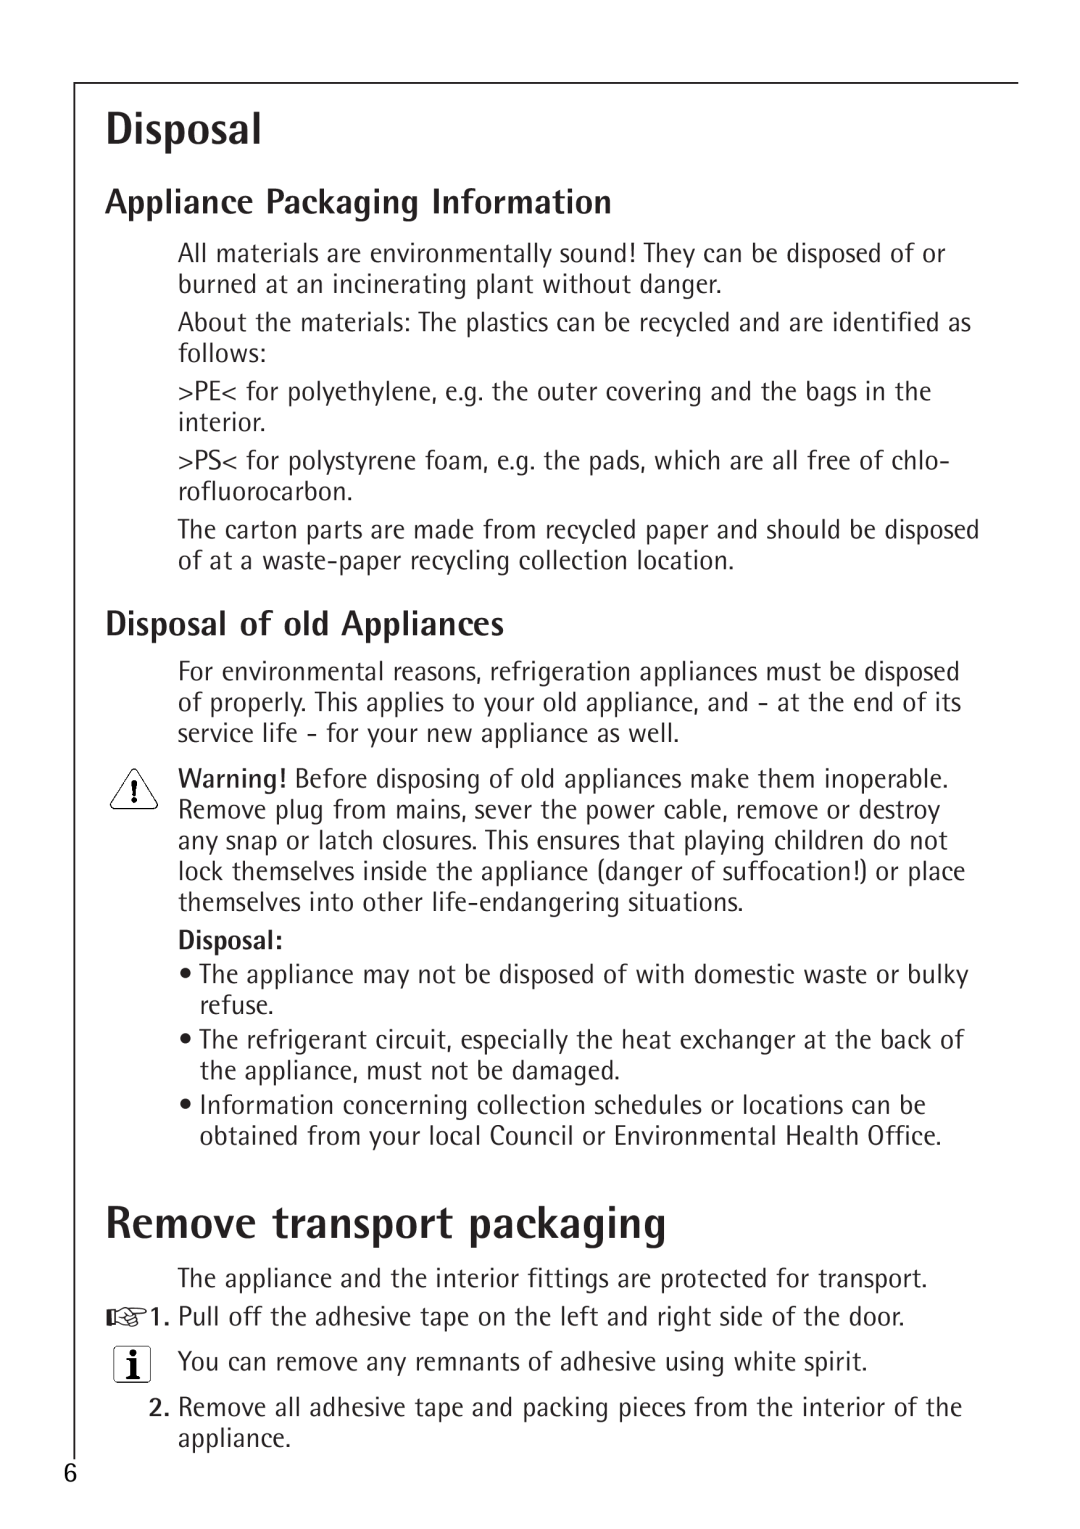 Electrolux 86000 i Remove transport packaging, Appliance Packaging Information, Disposal of old Appliances 